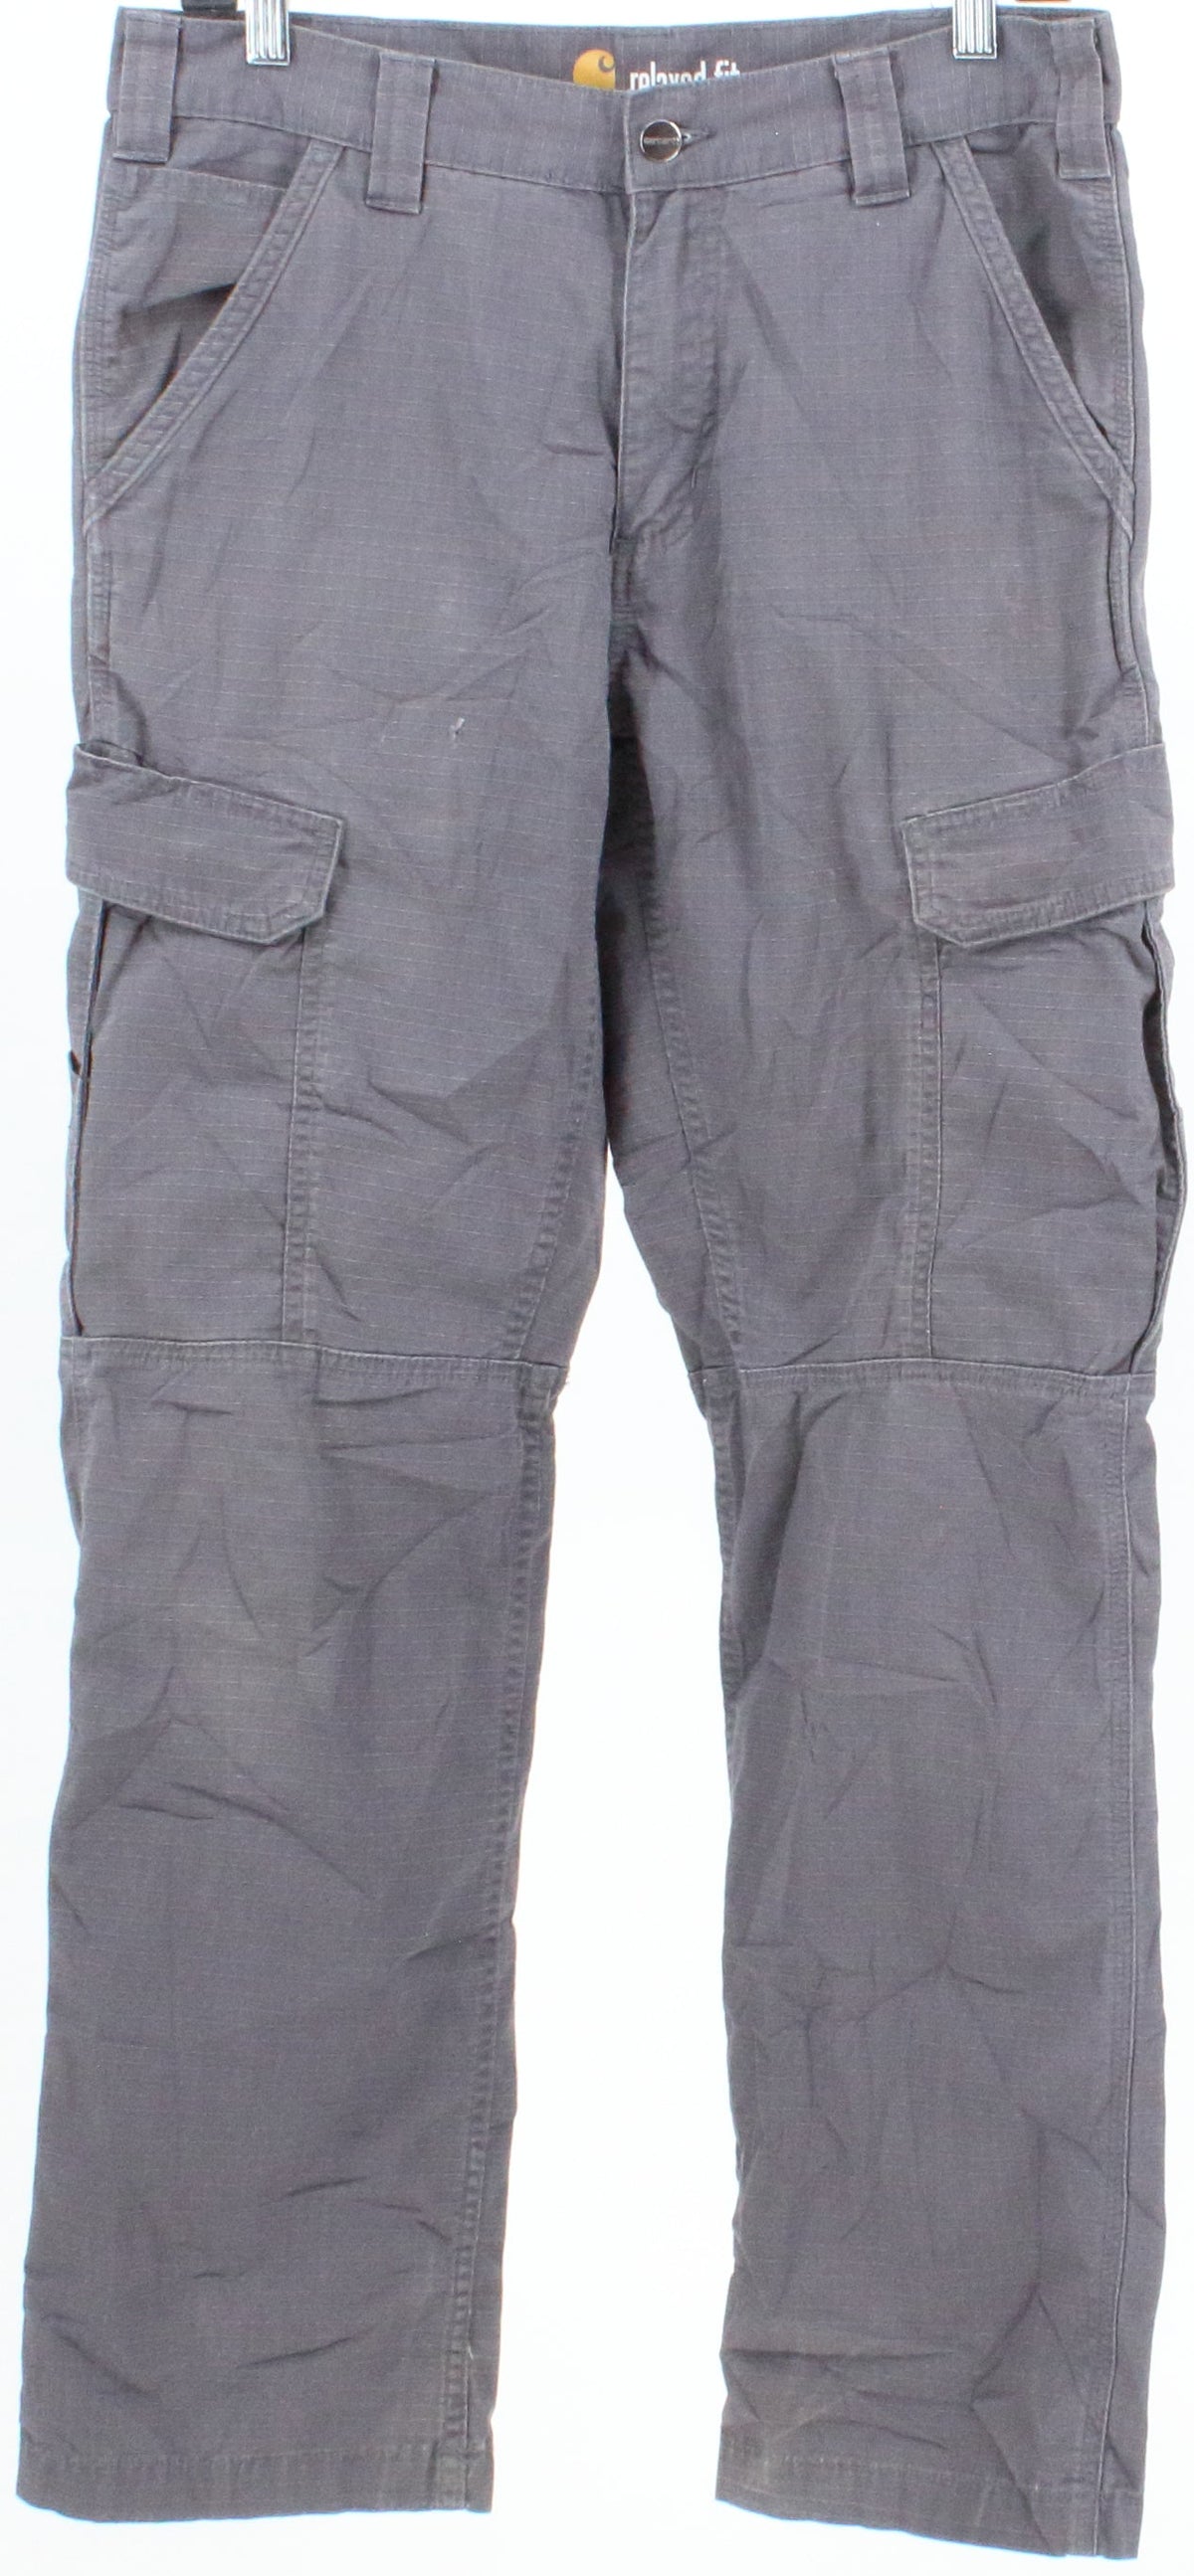 Carhartt Relaxed Fit Side Pockets Grey Cargo Pants